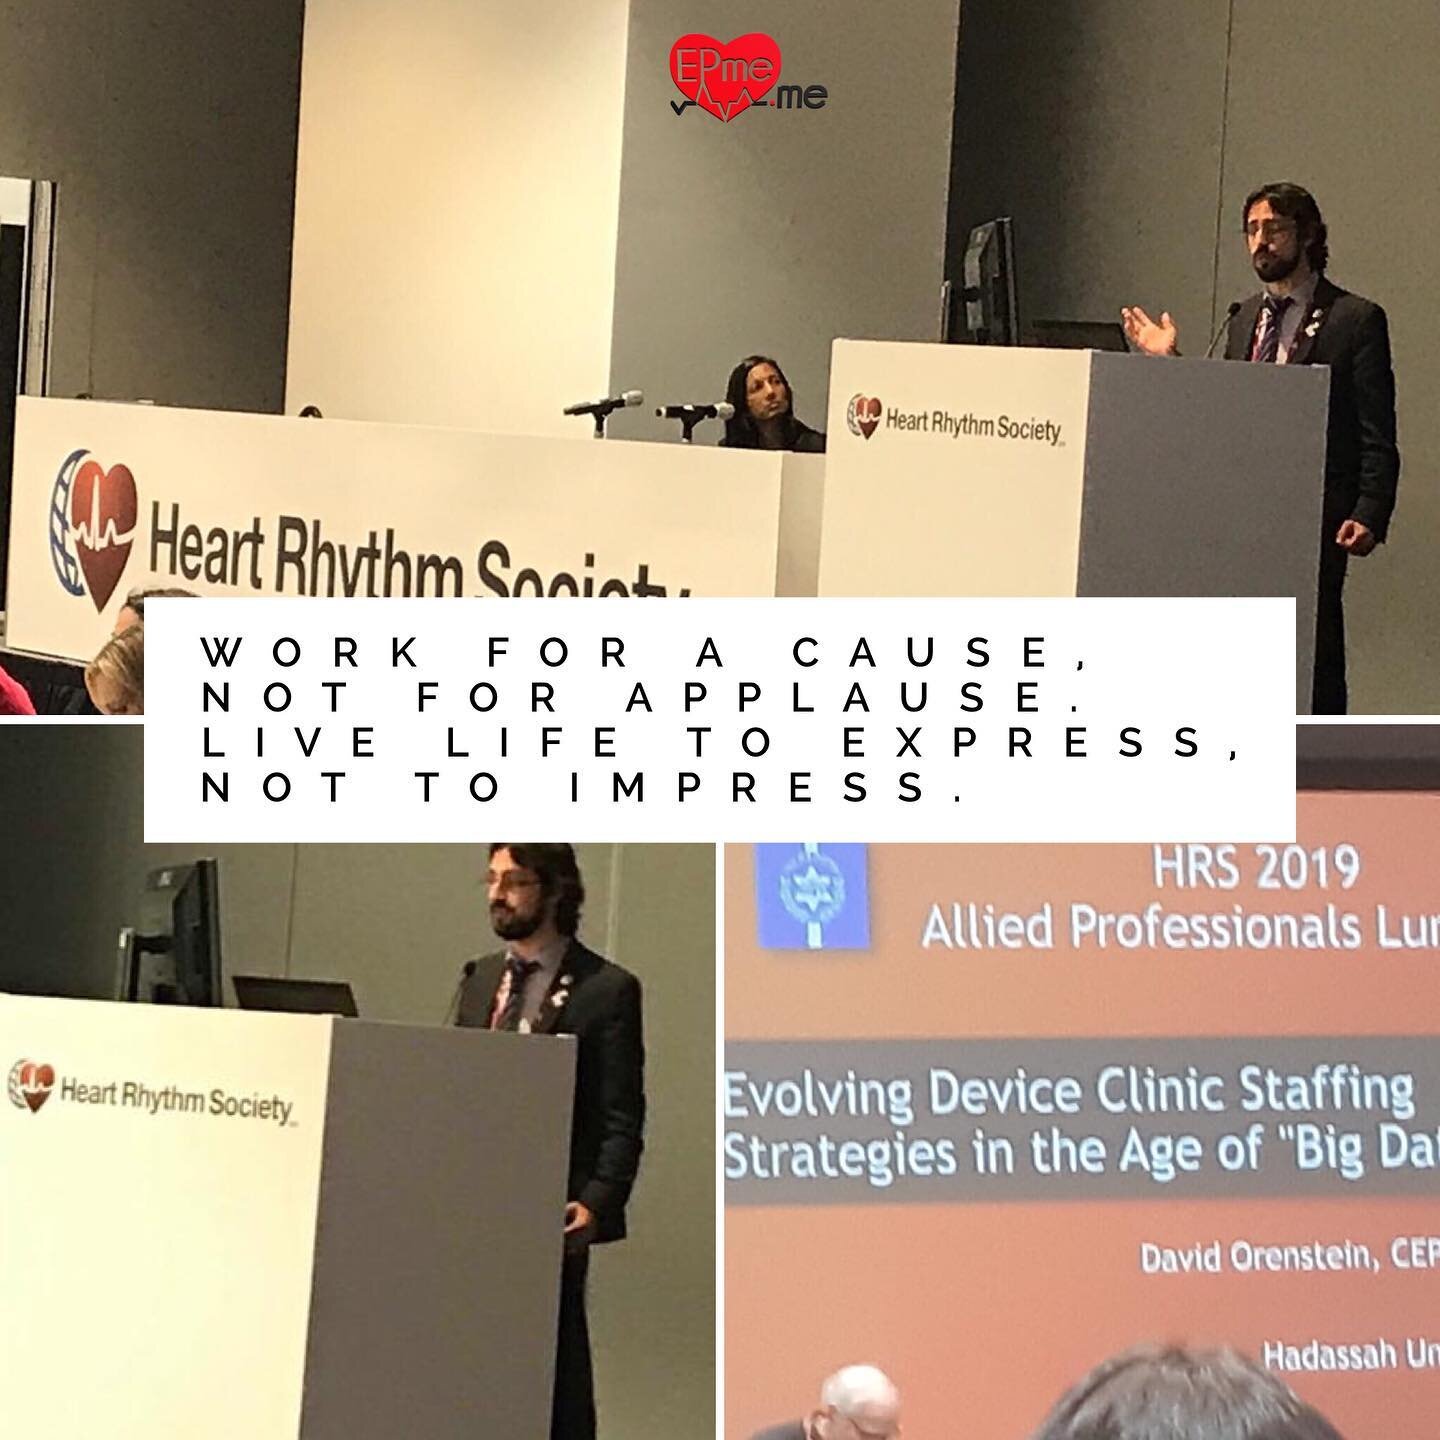 I can't believe that a month has passed since the #HRS19  #pacing #cardiology #cardiologynurse
#electrophysiology #ekg #ecg #heart
#heartrhythm #eps #ep #health
#medstudent #med #medic #medicine
#medical #catheterization #ablation
#cardiacablation #i